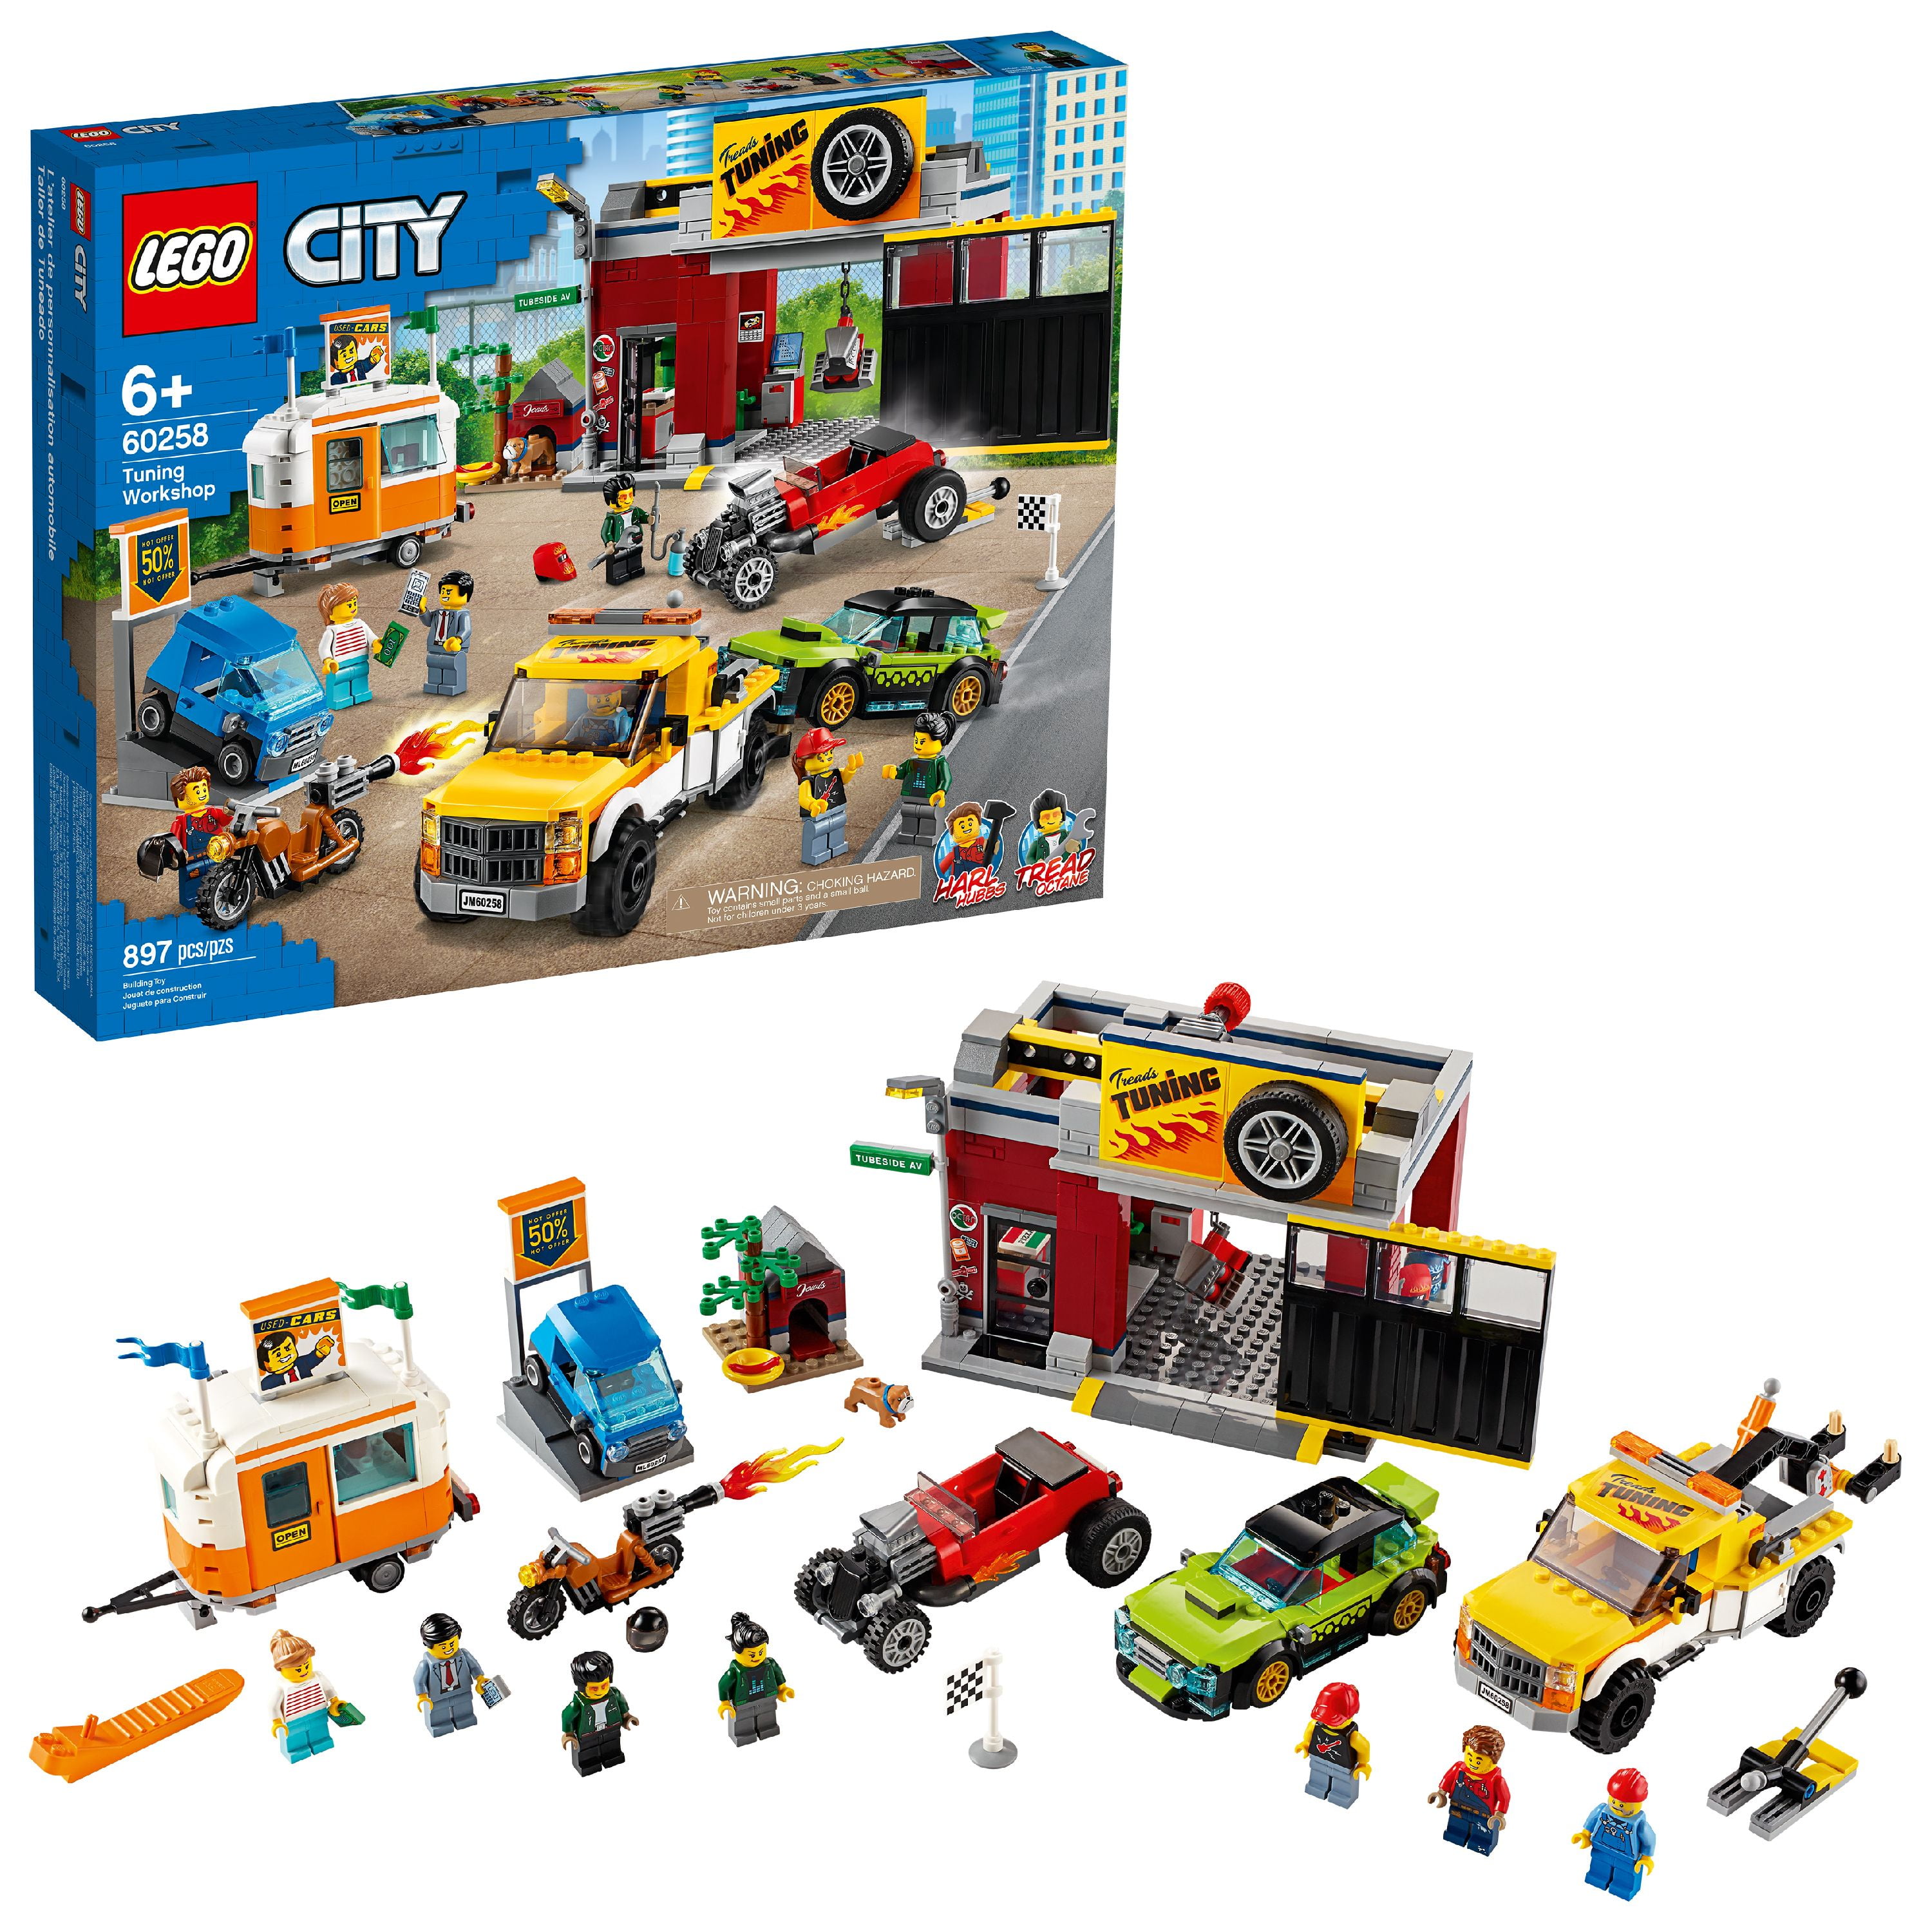 LEGO City Tuning Workshop Toy Car Garage 60258, Cool Vehicle Building Set  for Kids (897 Pieces)